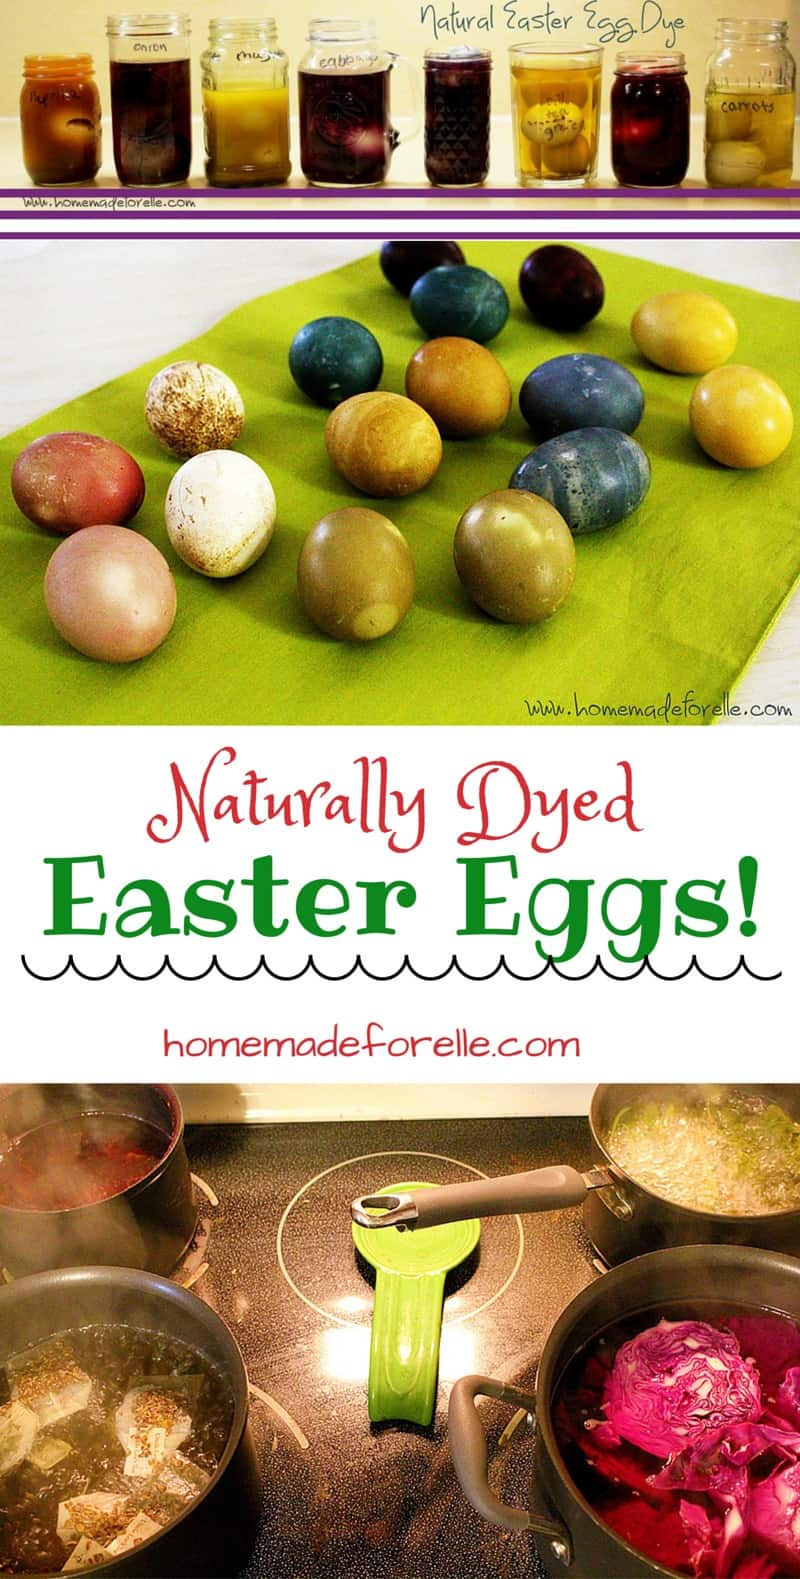 top image - jars of dye with eggs, middle image - many dyed eggs on green towel, bottom image 4 pots boiling on stove top with title text reading Naturally Dyed Easter Eggs